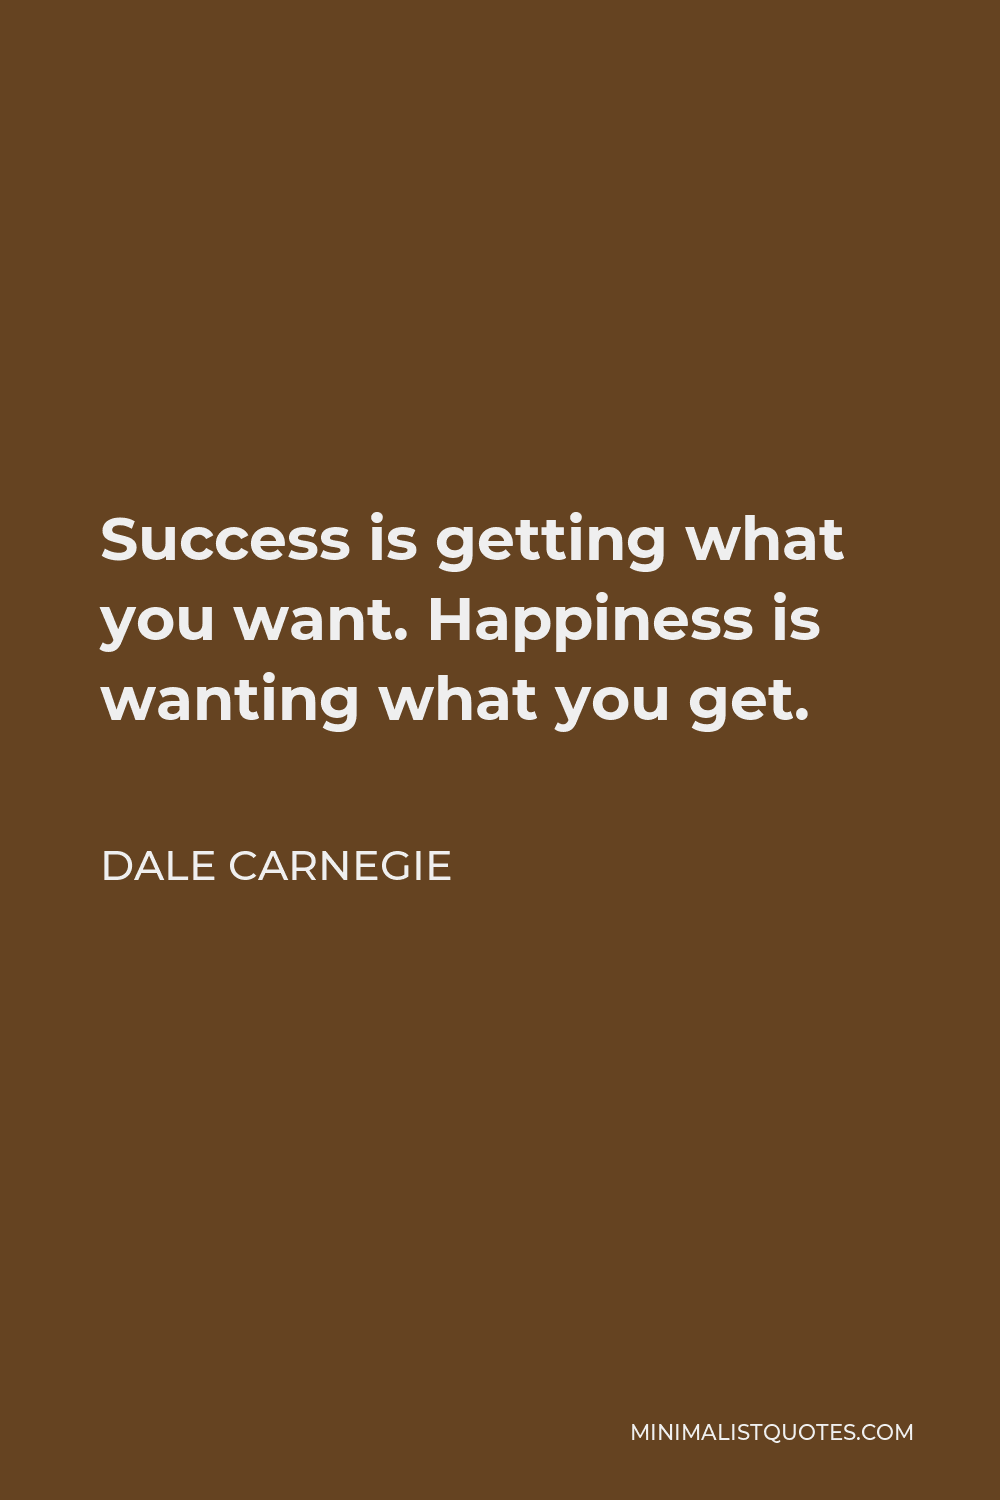 Andrew Carnegie Quote: Success is getting what you want. Happiness is ...